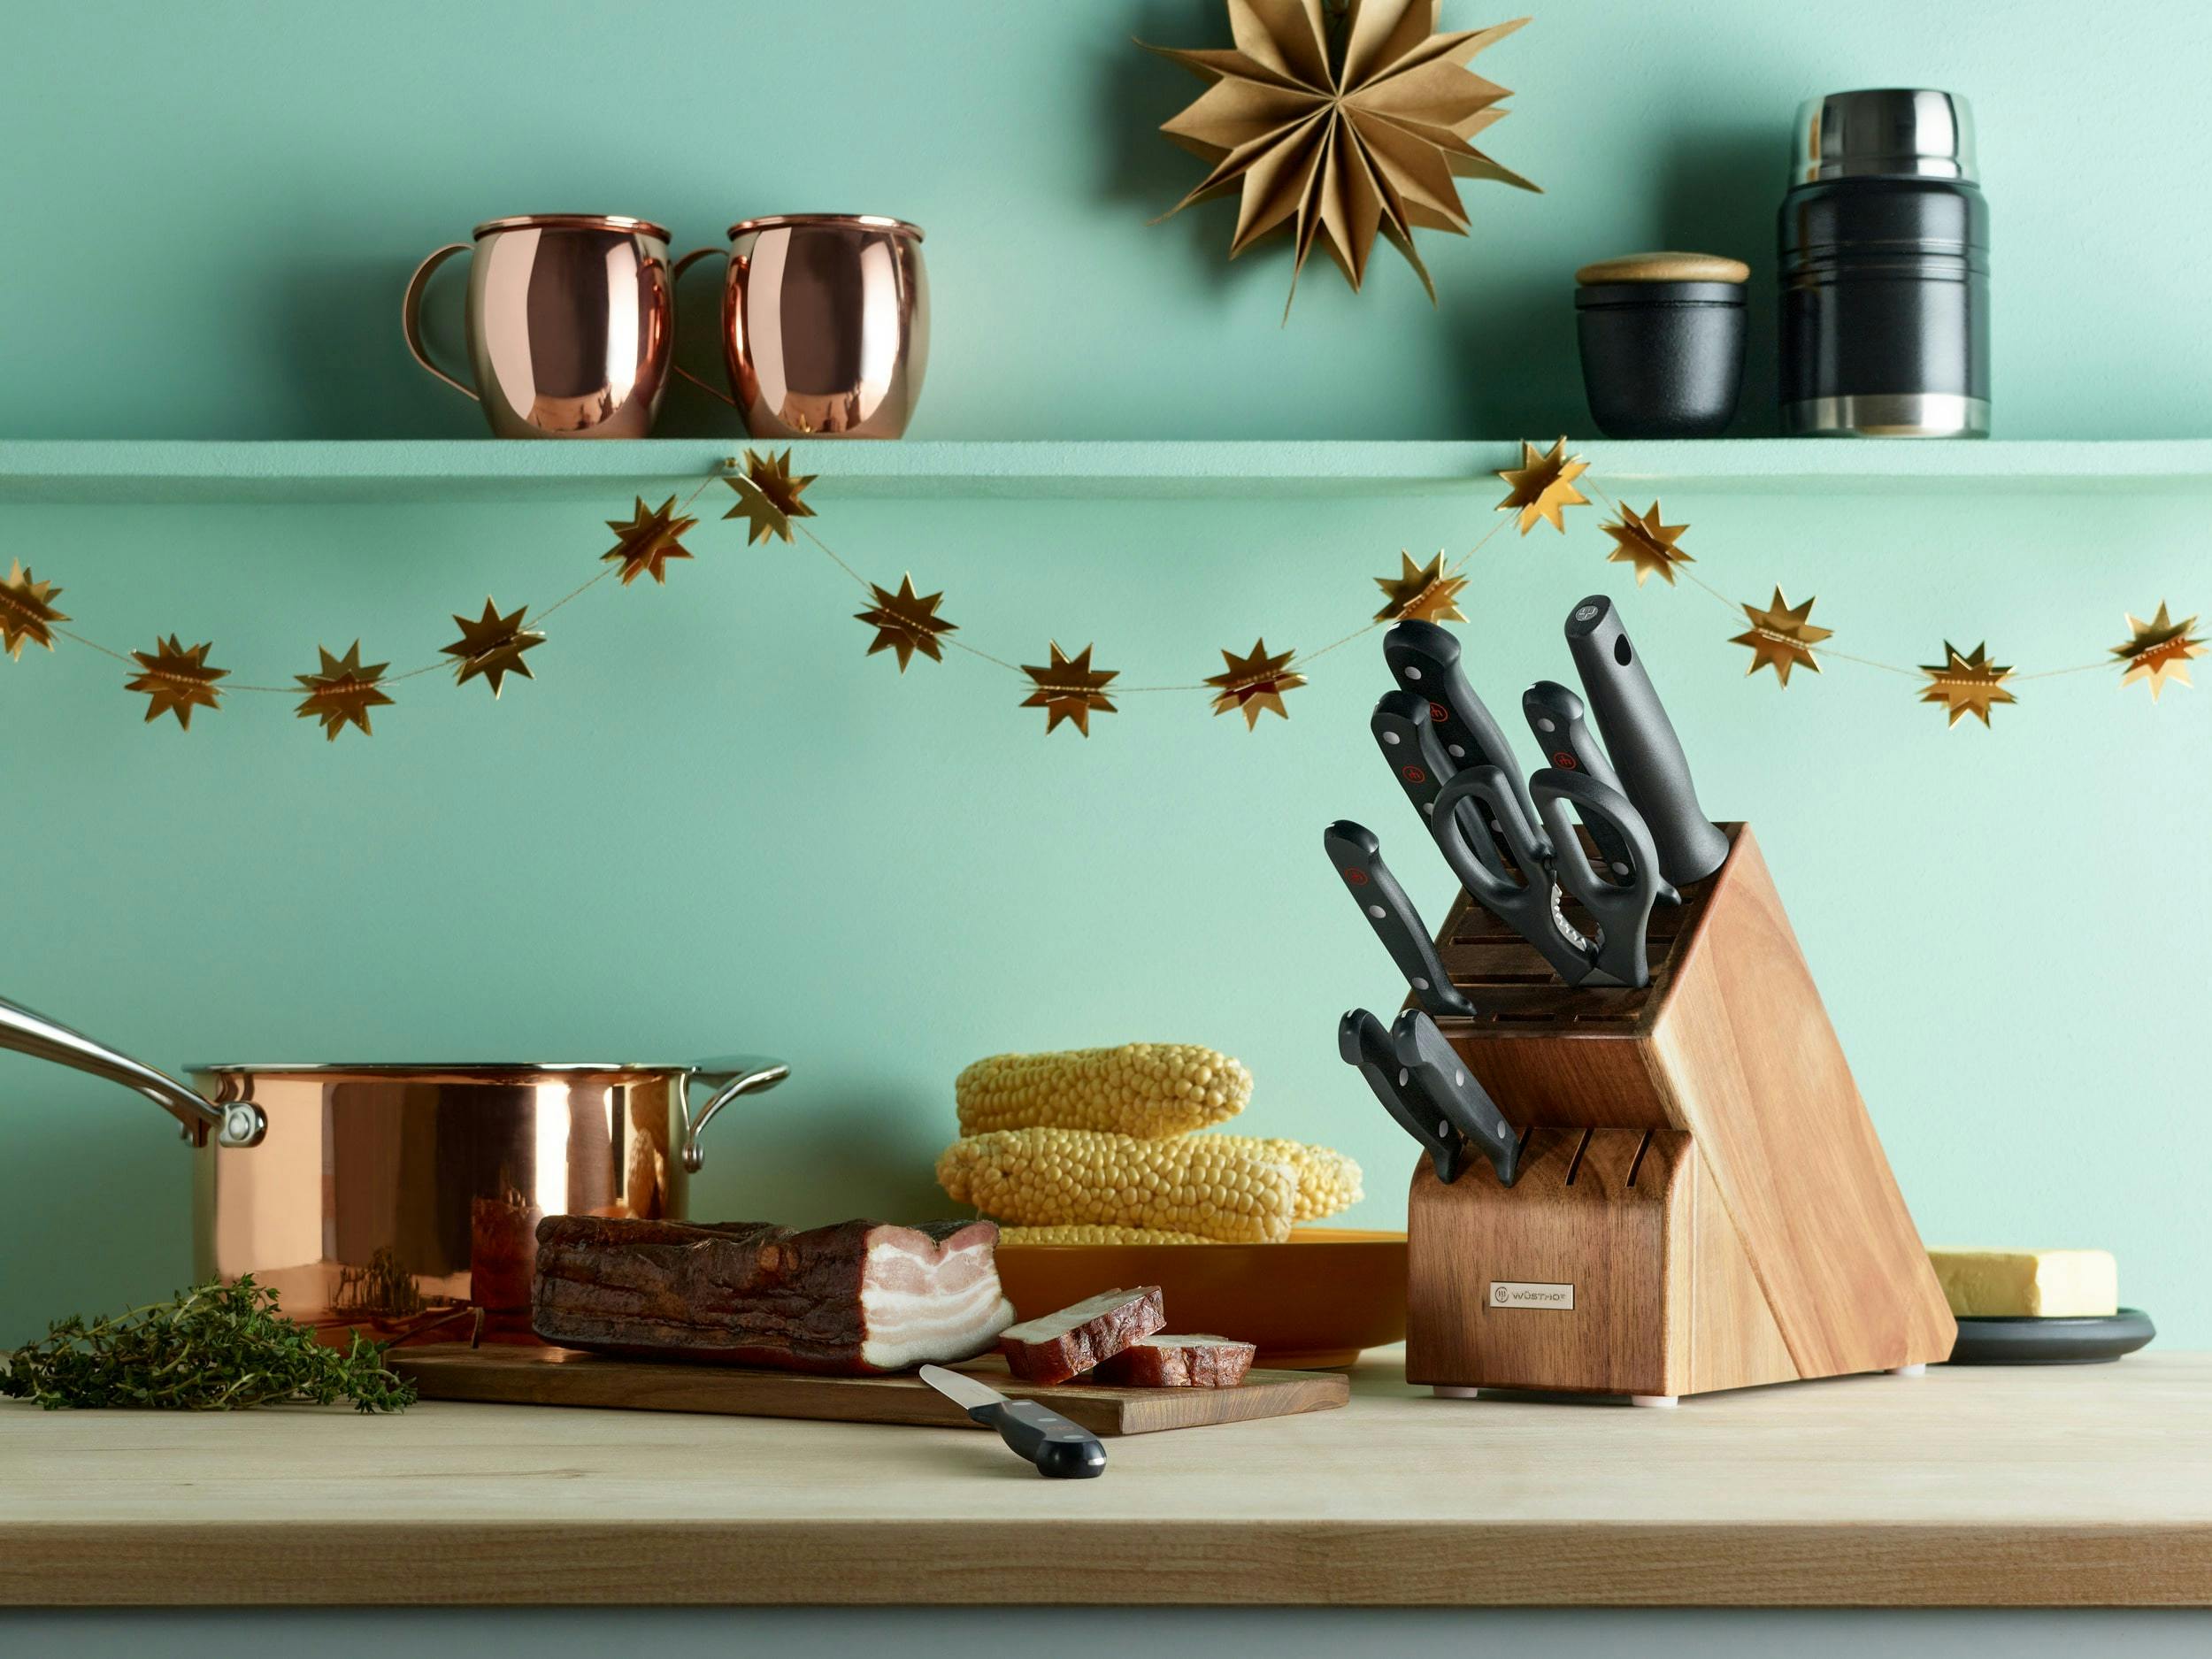 Knife block next to holiday star garland on kitchen counter